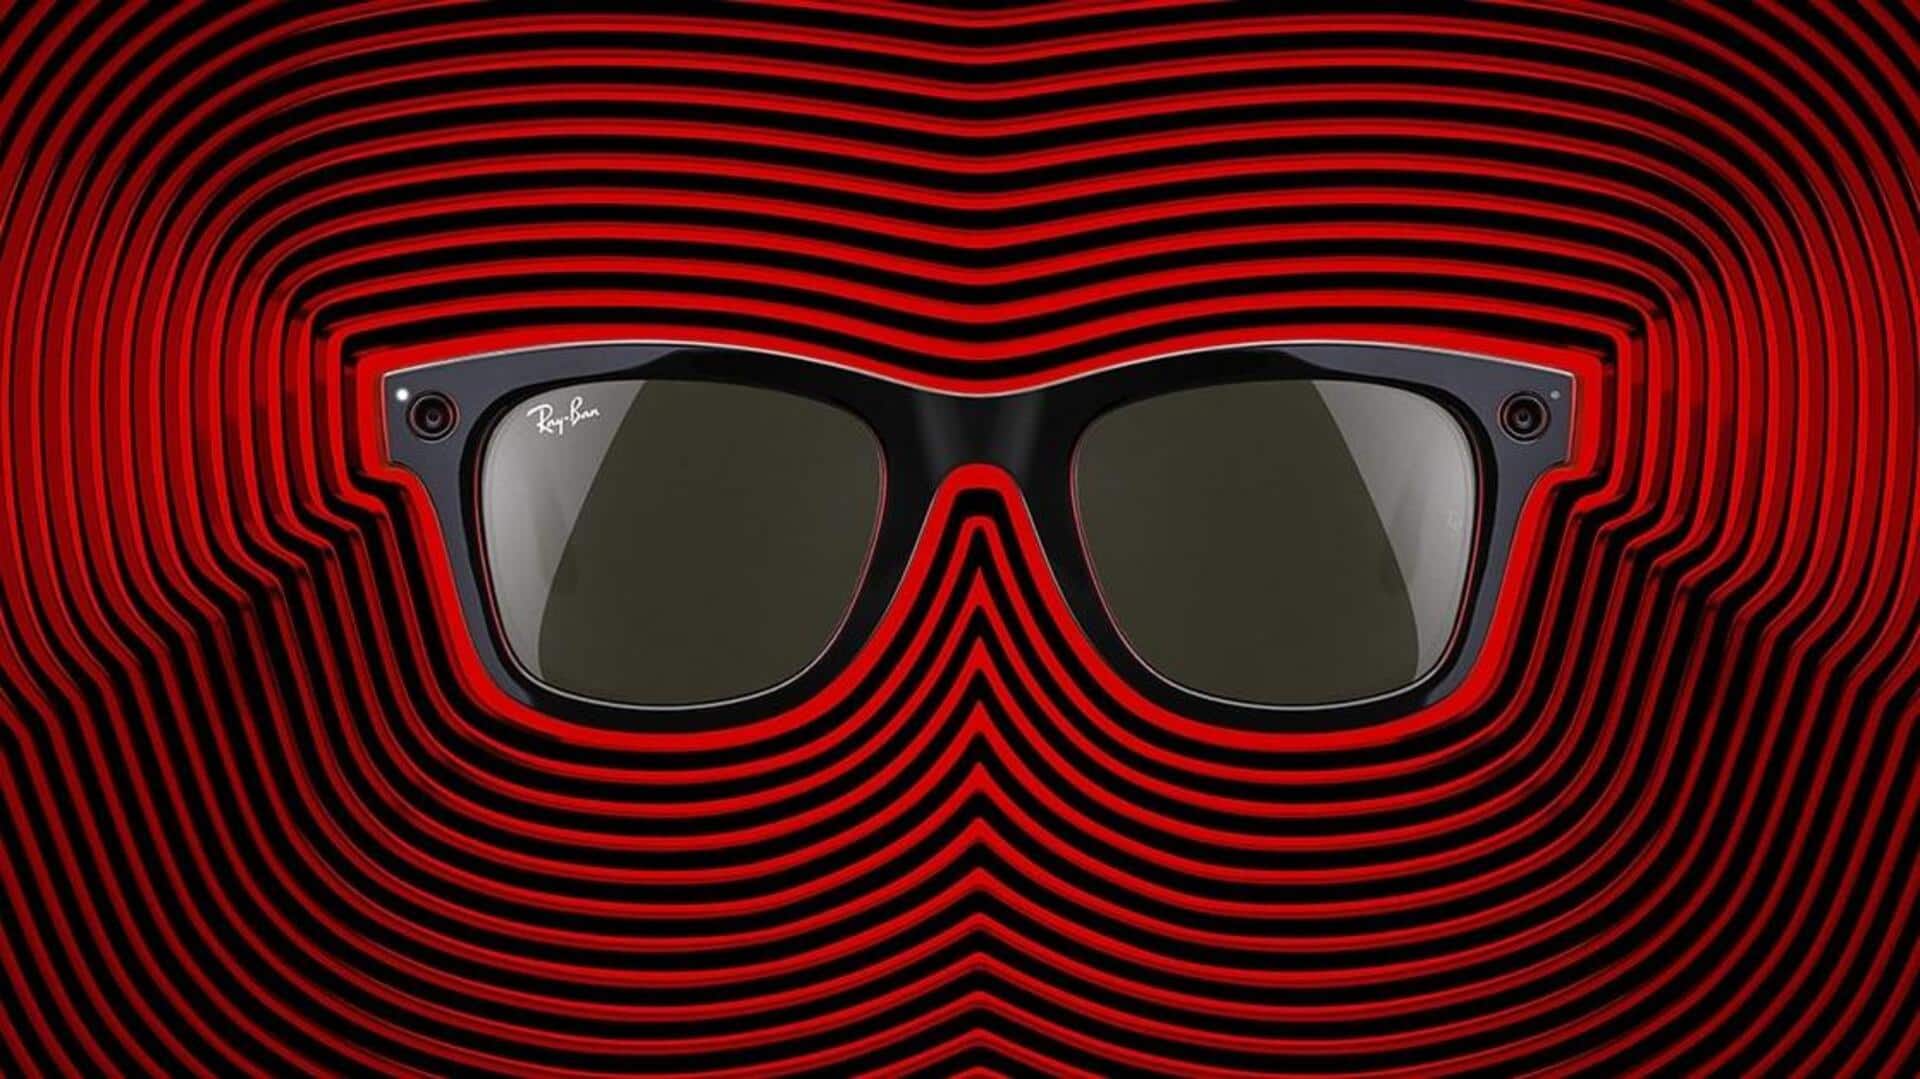 Meta's Ray-Ban smart glasses can now recognize landmarks